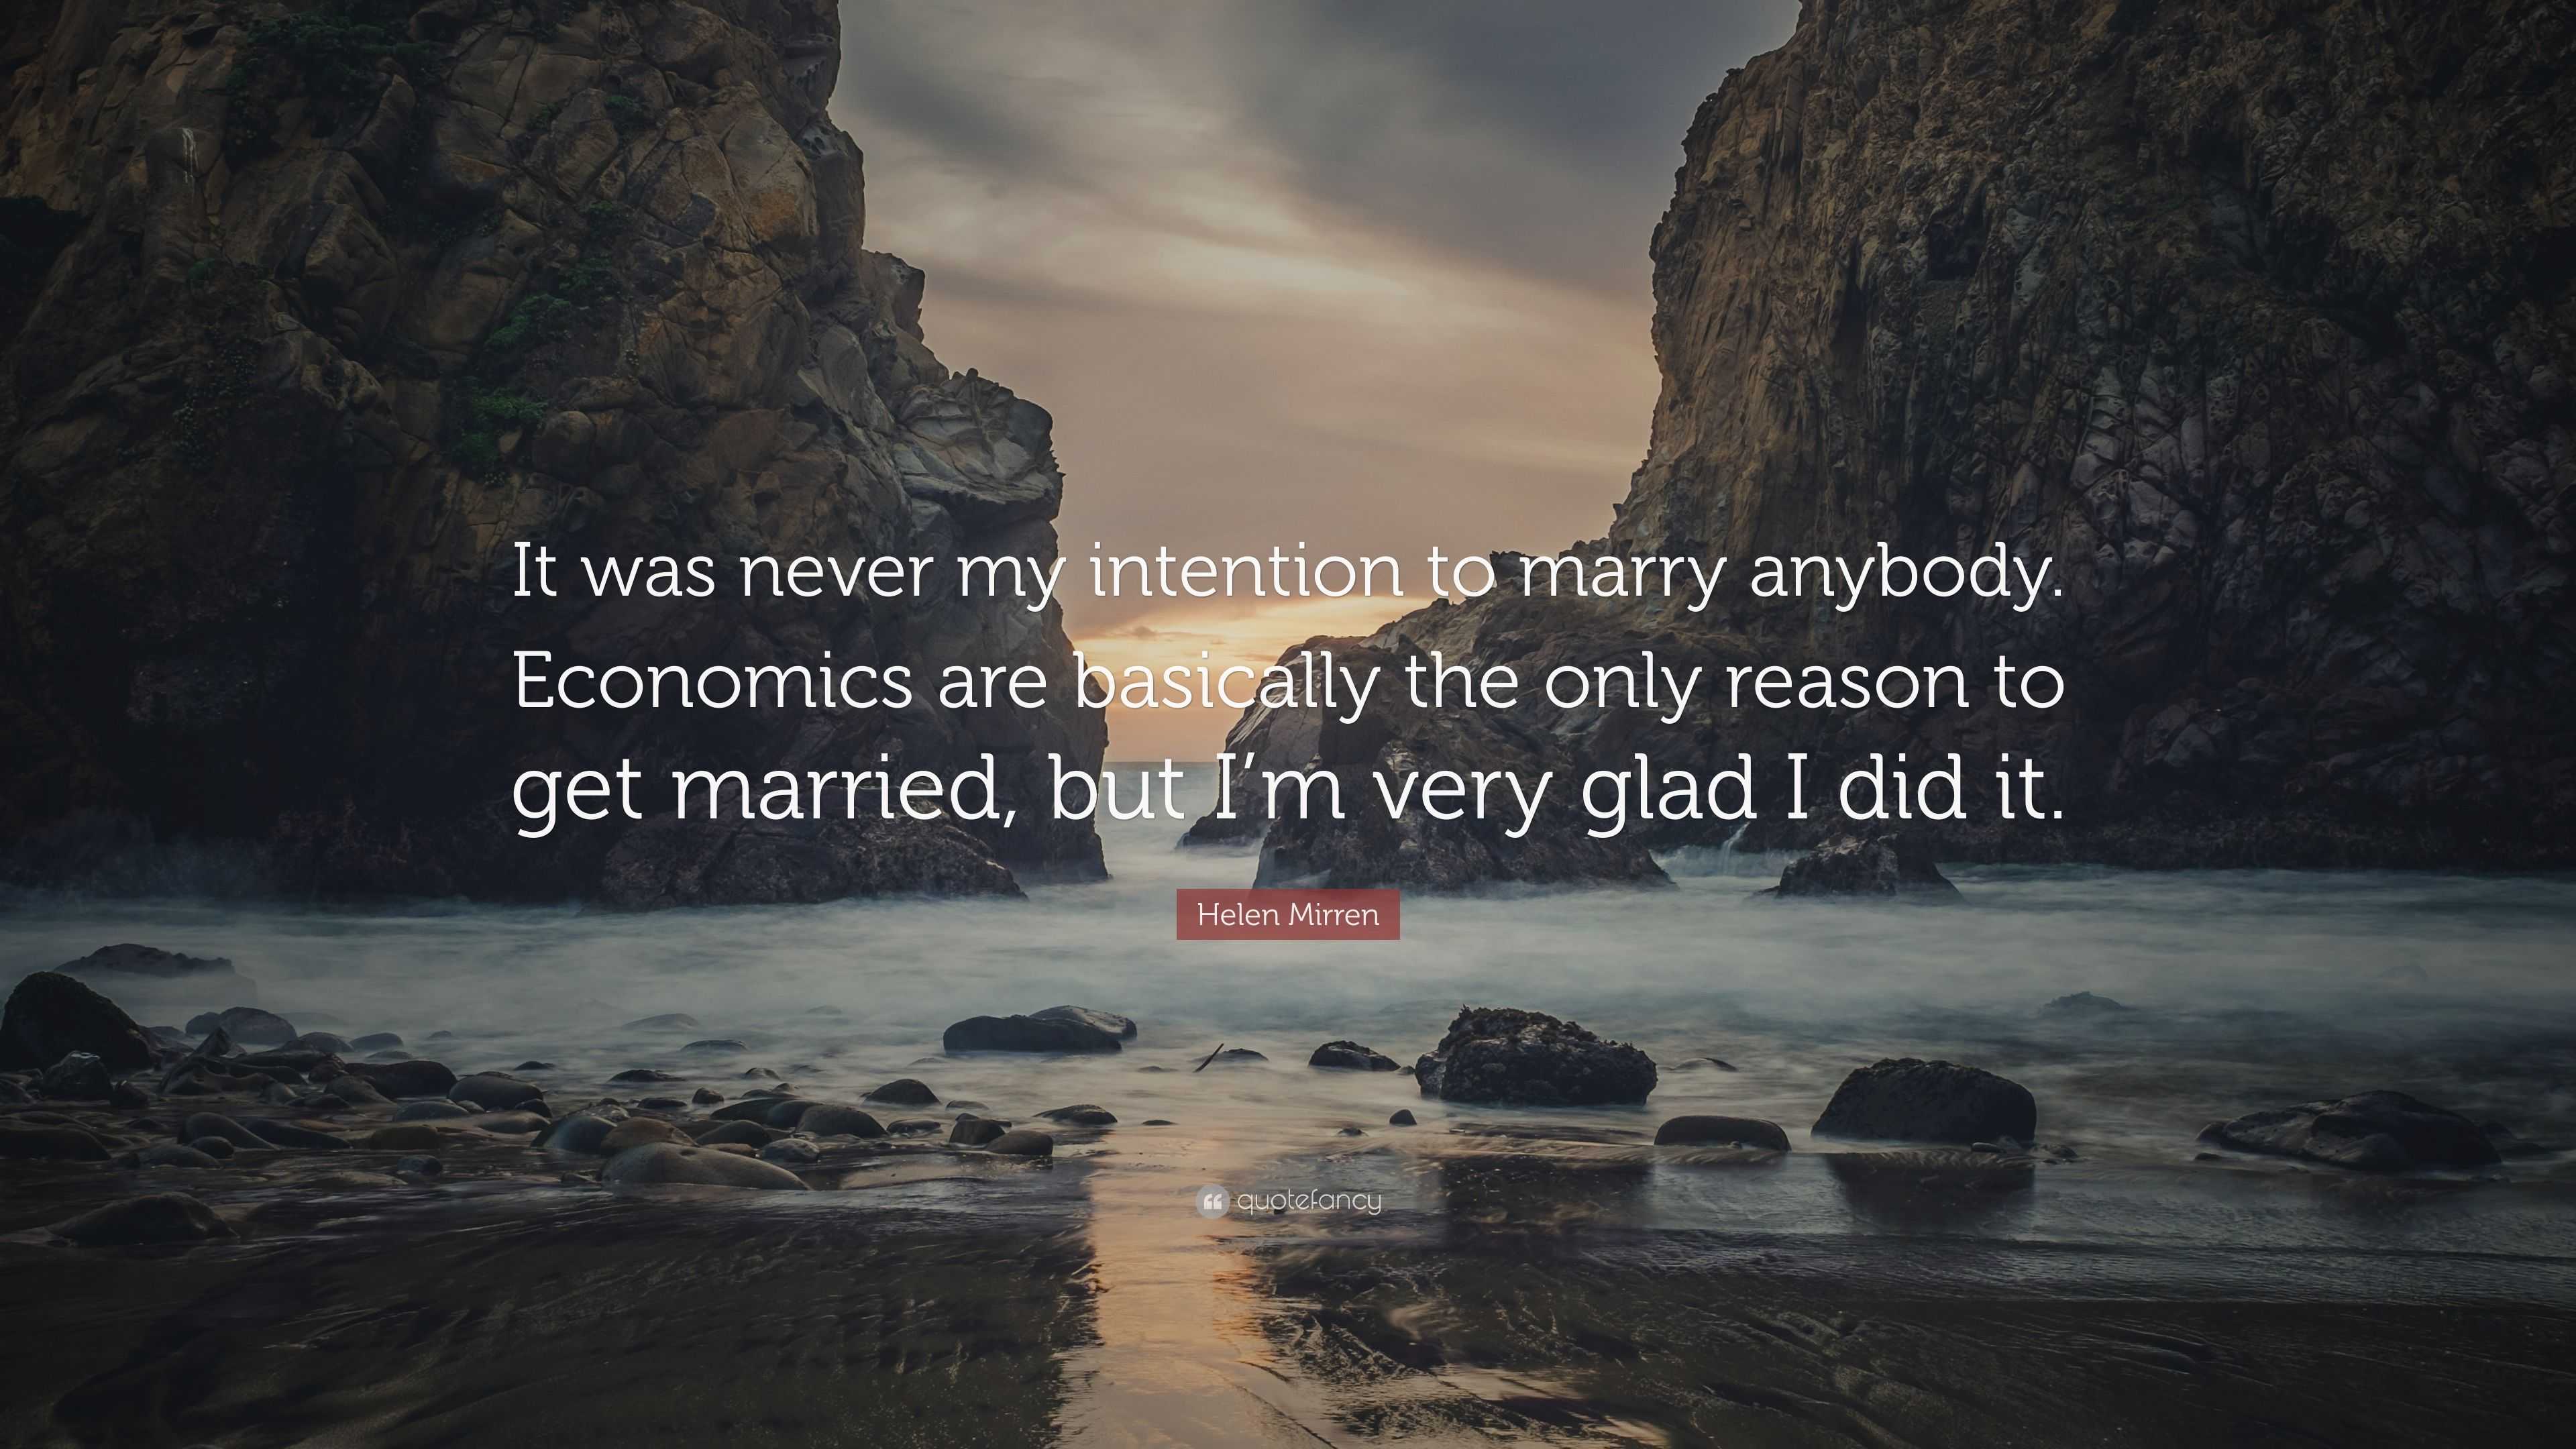 Helen Mirren Quote “it Was Never My Intention To Marry Anybody Economics Are Basically The 